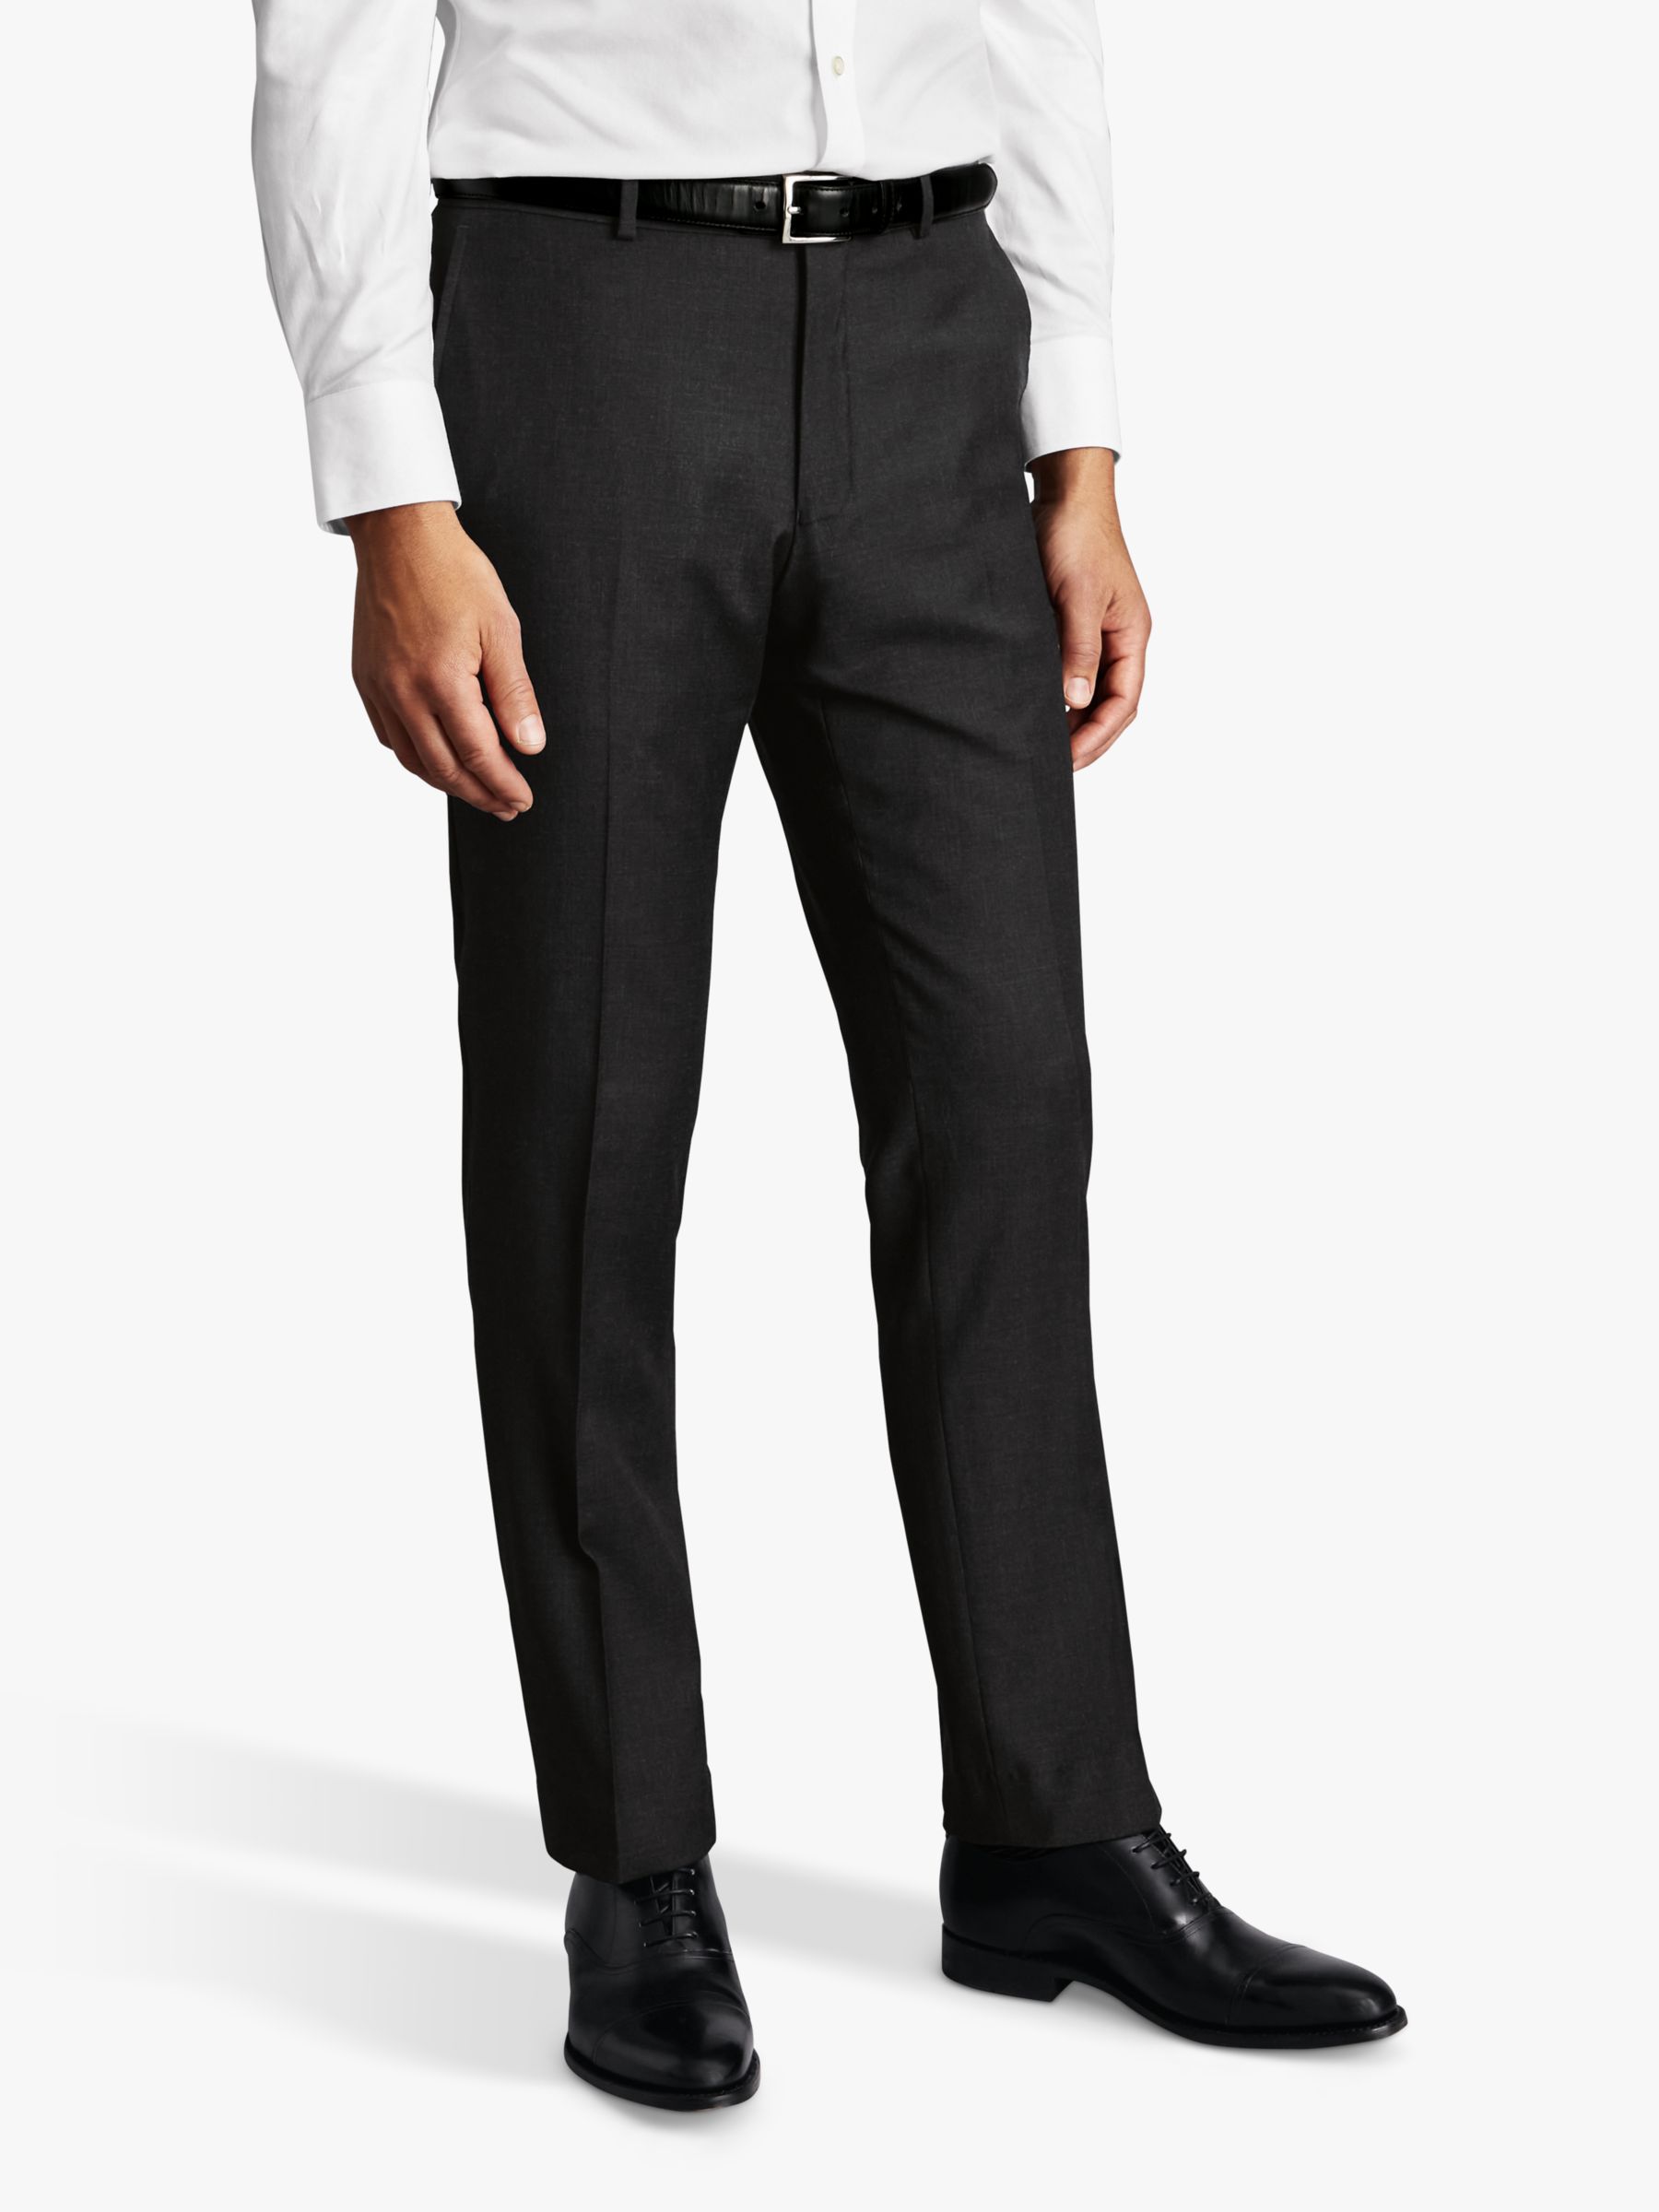 Charles Tyrwhitt Natural Stretch Twill Suit Trousers, Navy at John Lewis &  Partners